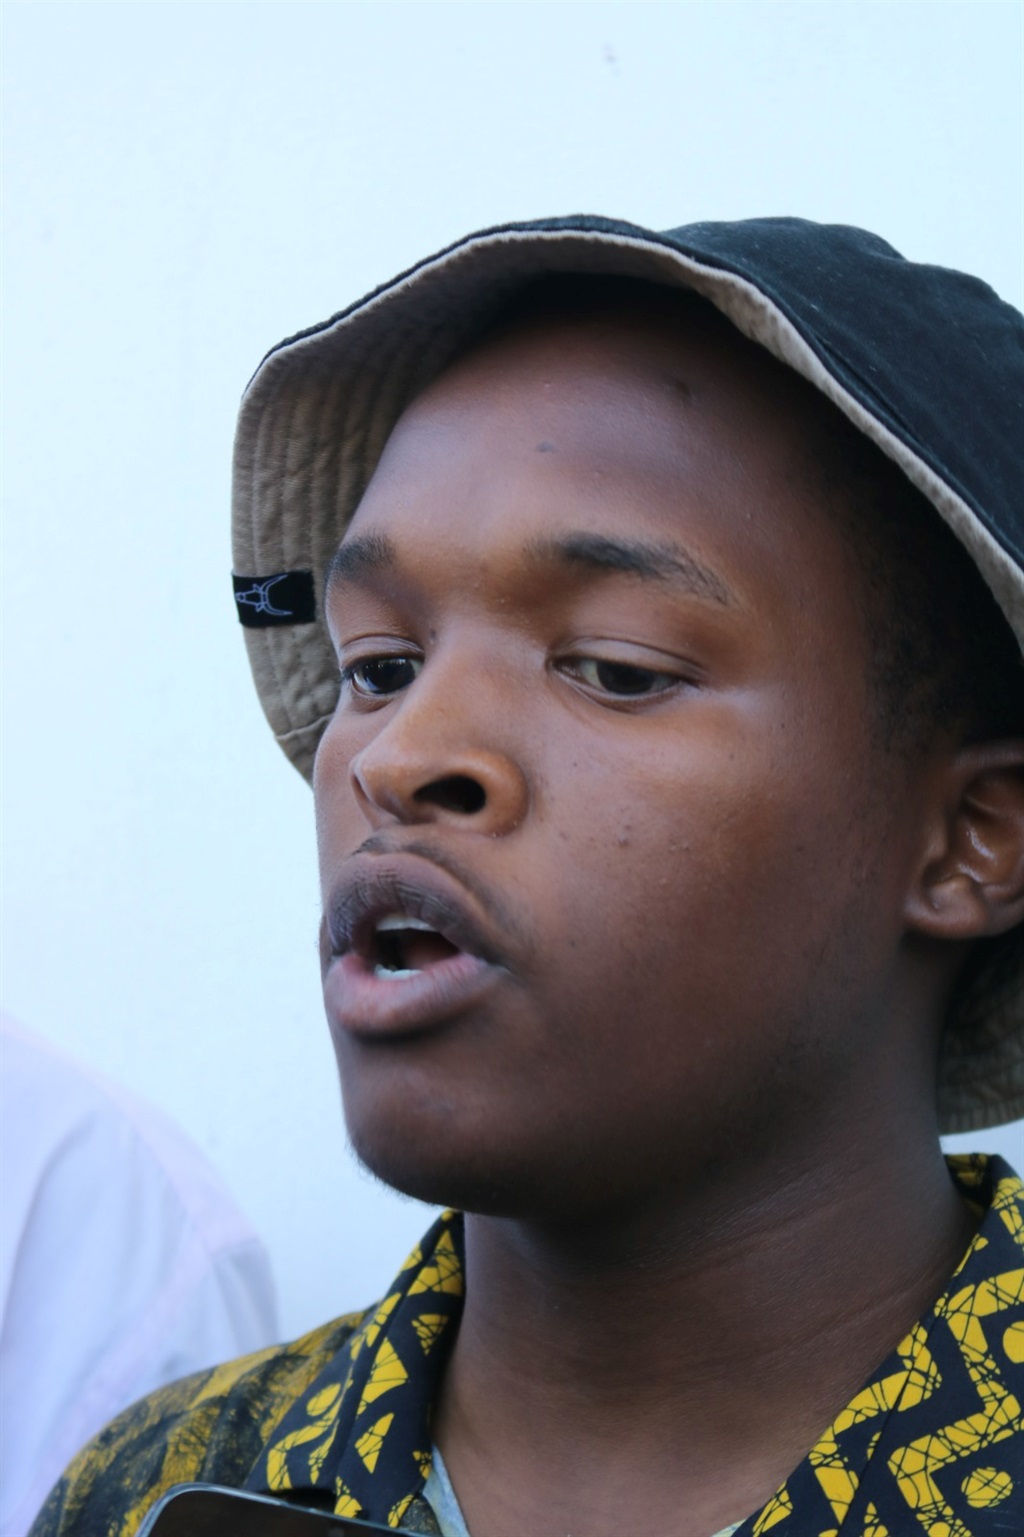 Ntsika Madondile also used the internet to broaden his understanding of the subjects. Photo by Lulekwa Mbadamane